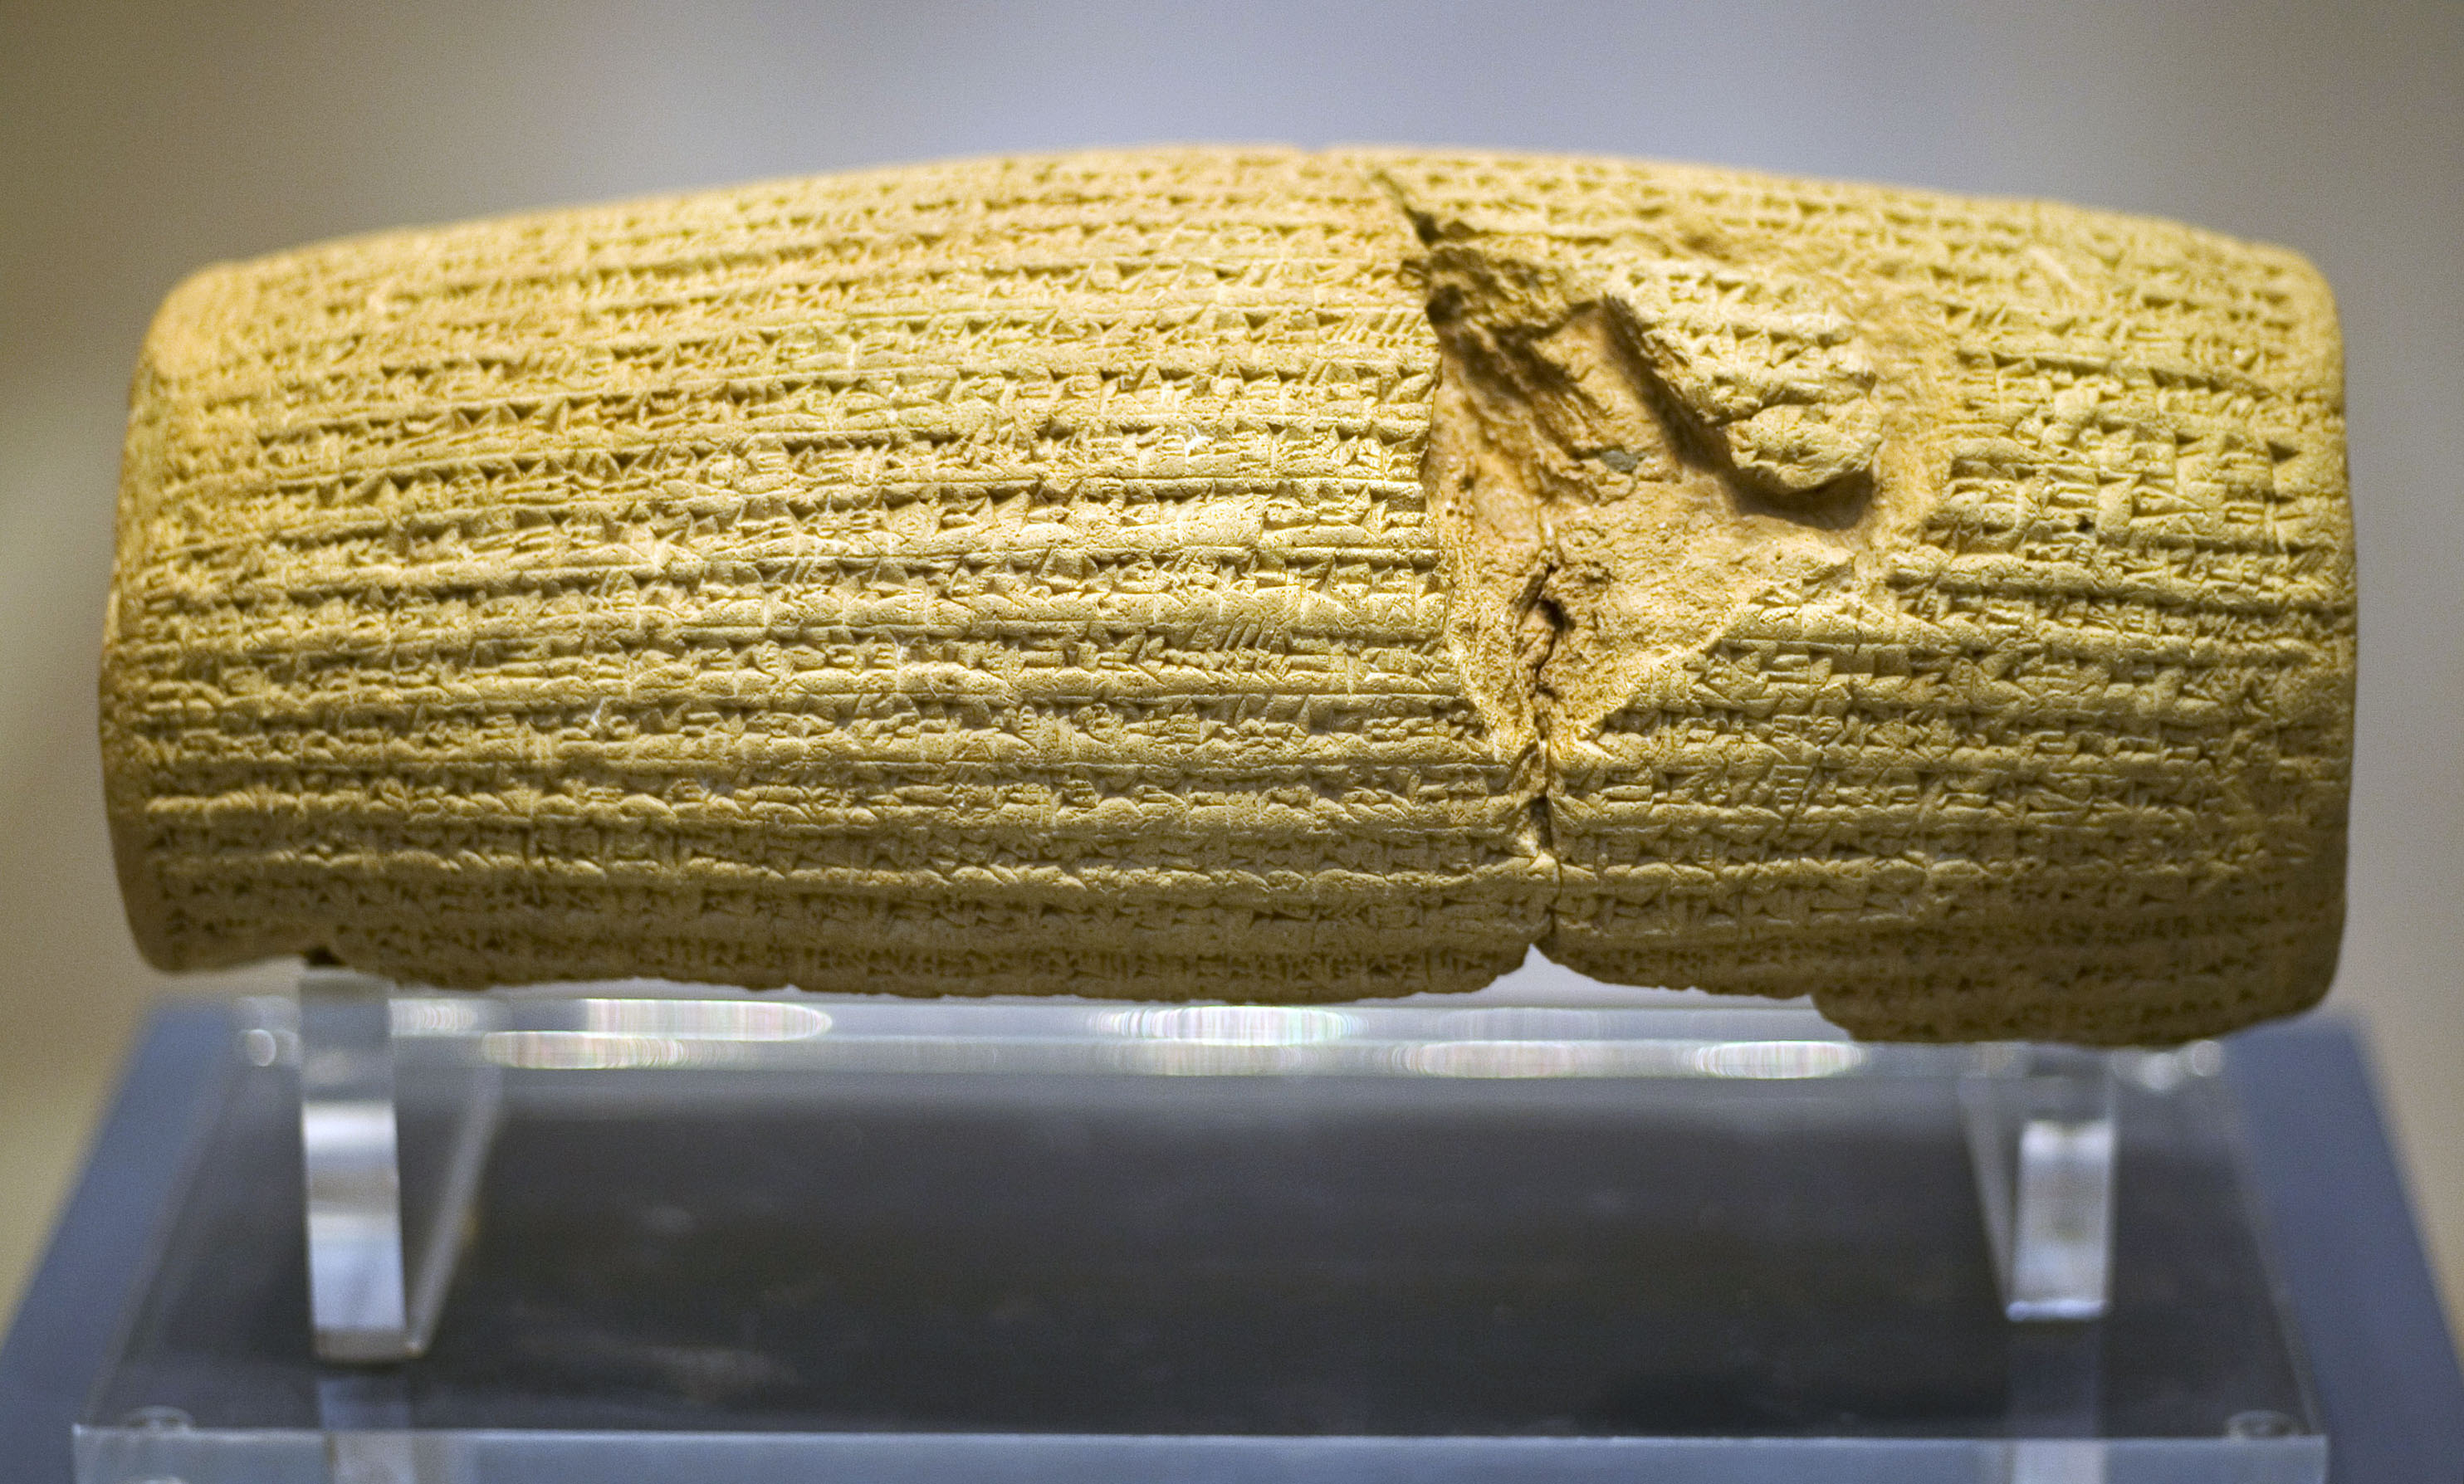 Cyrus Cylinder, known as the first charter of human rights